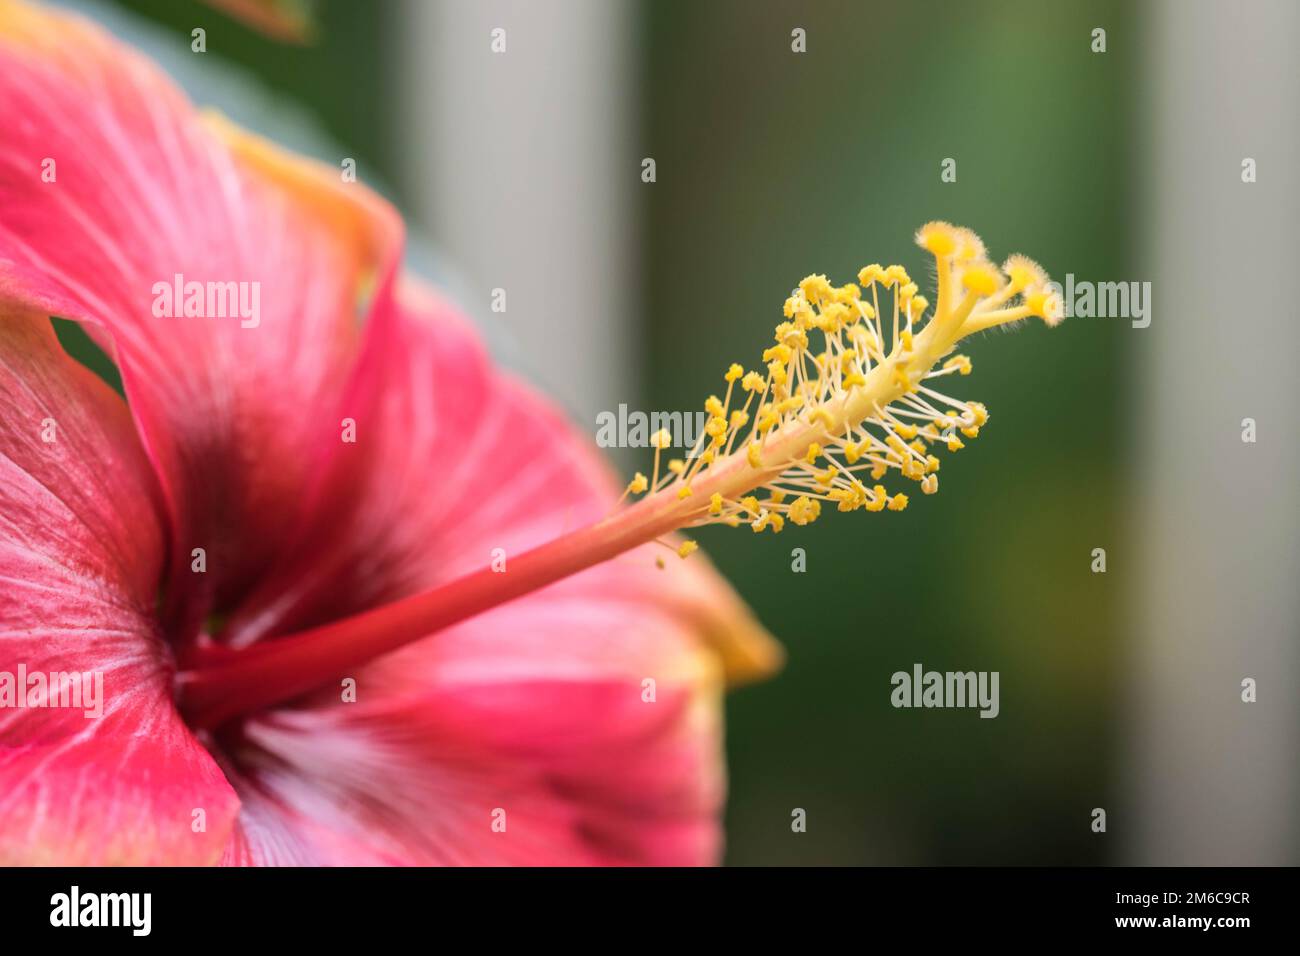 Extreme close up of a colourful flower stamen and stigma. Stock Photo